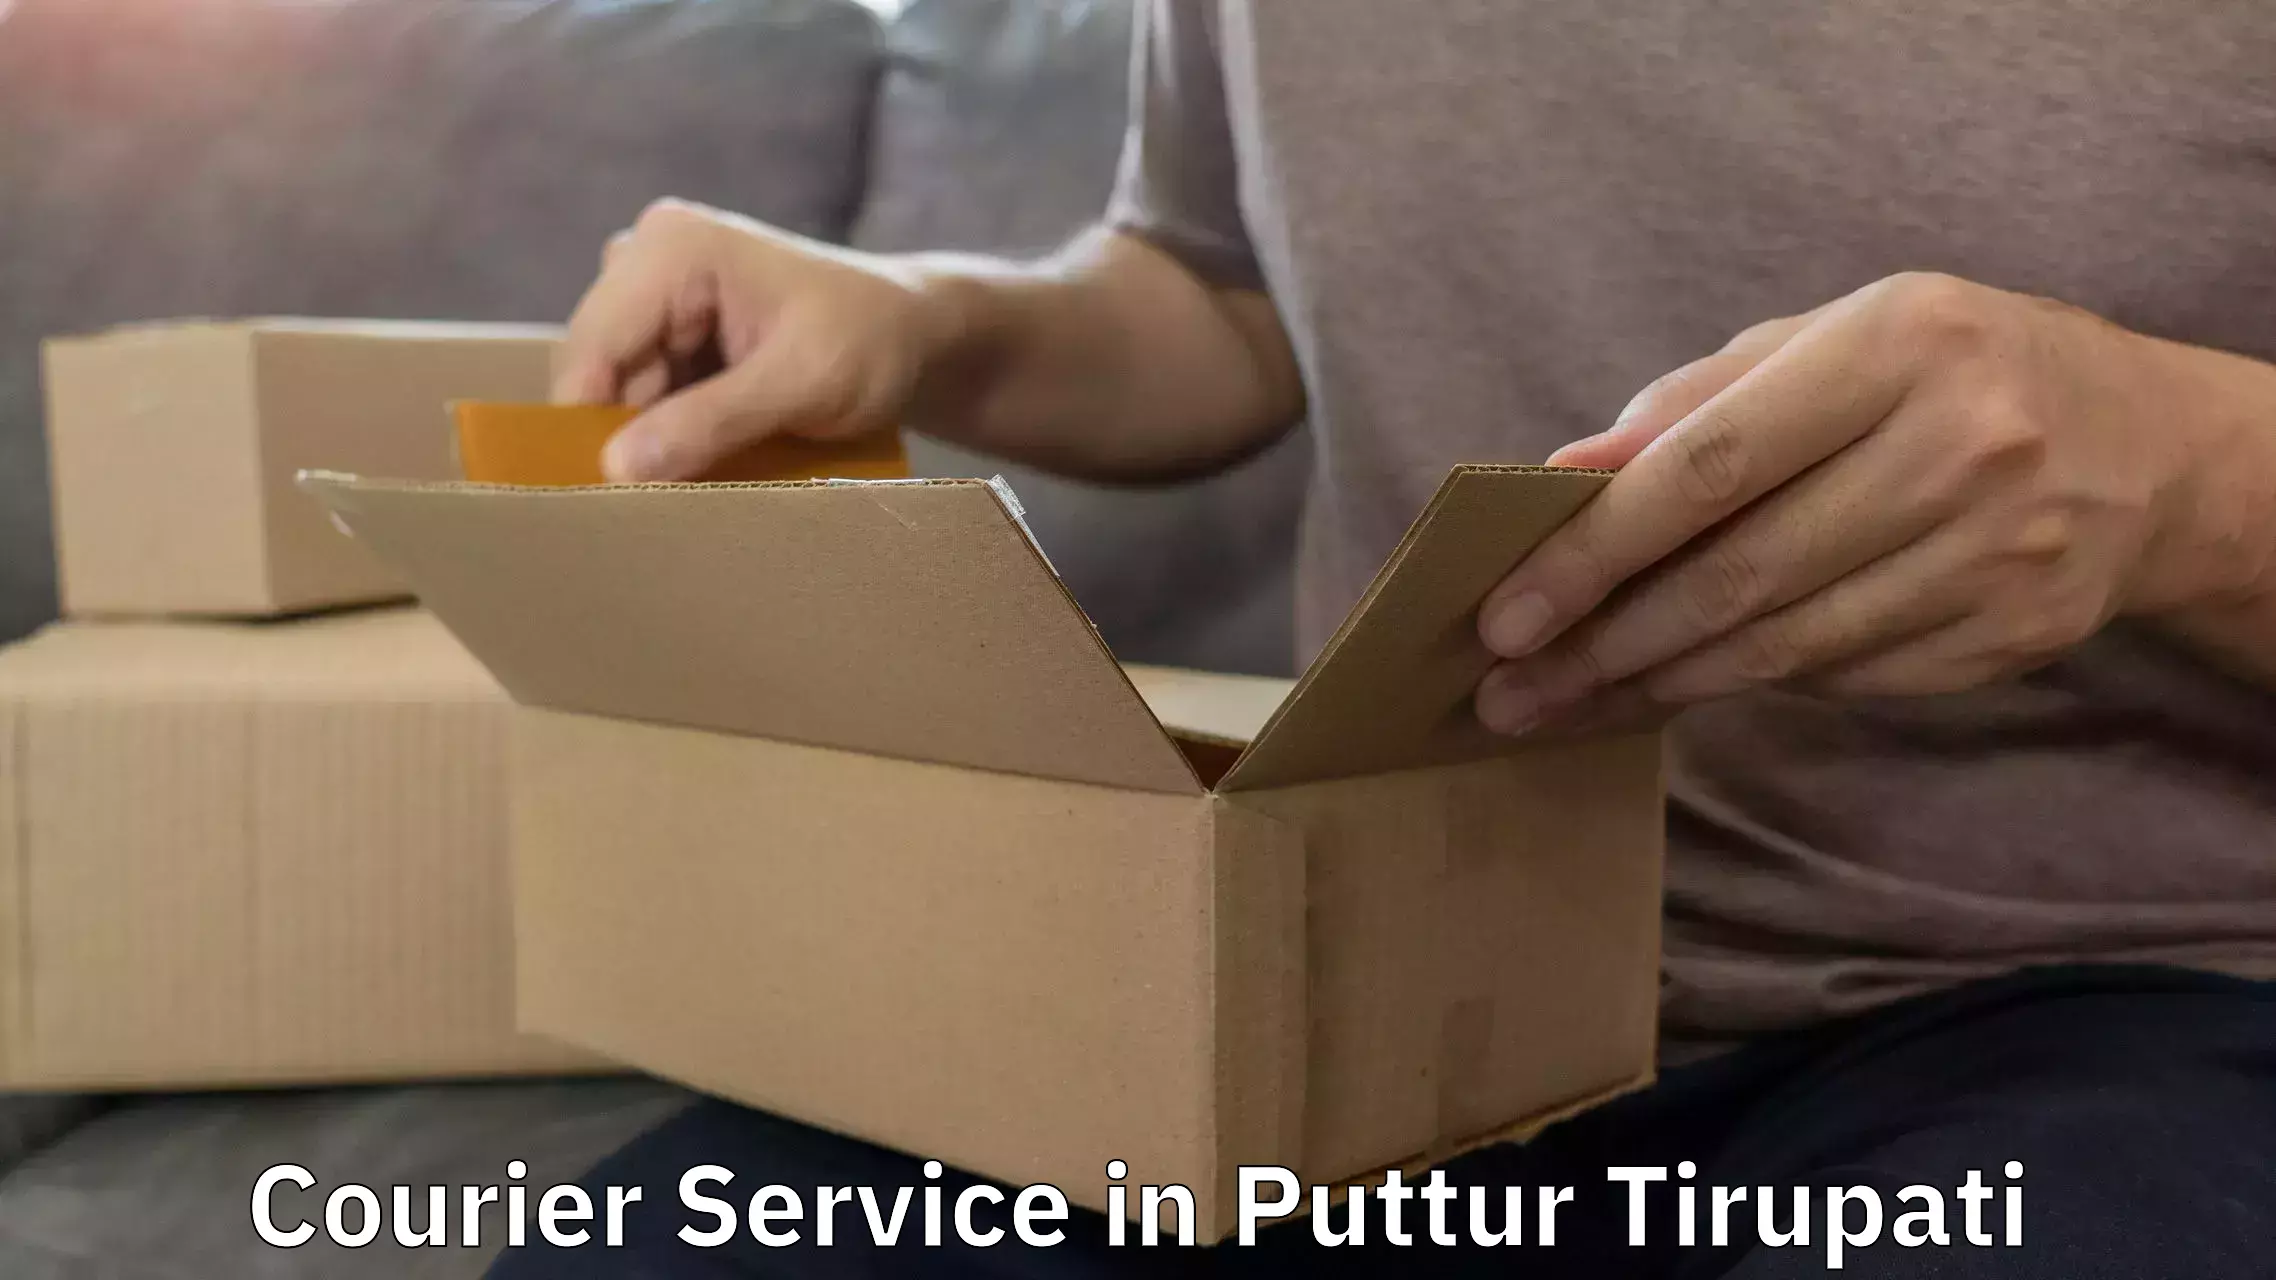 Integrated shipping services in Puttur Tirupati